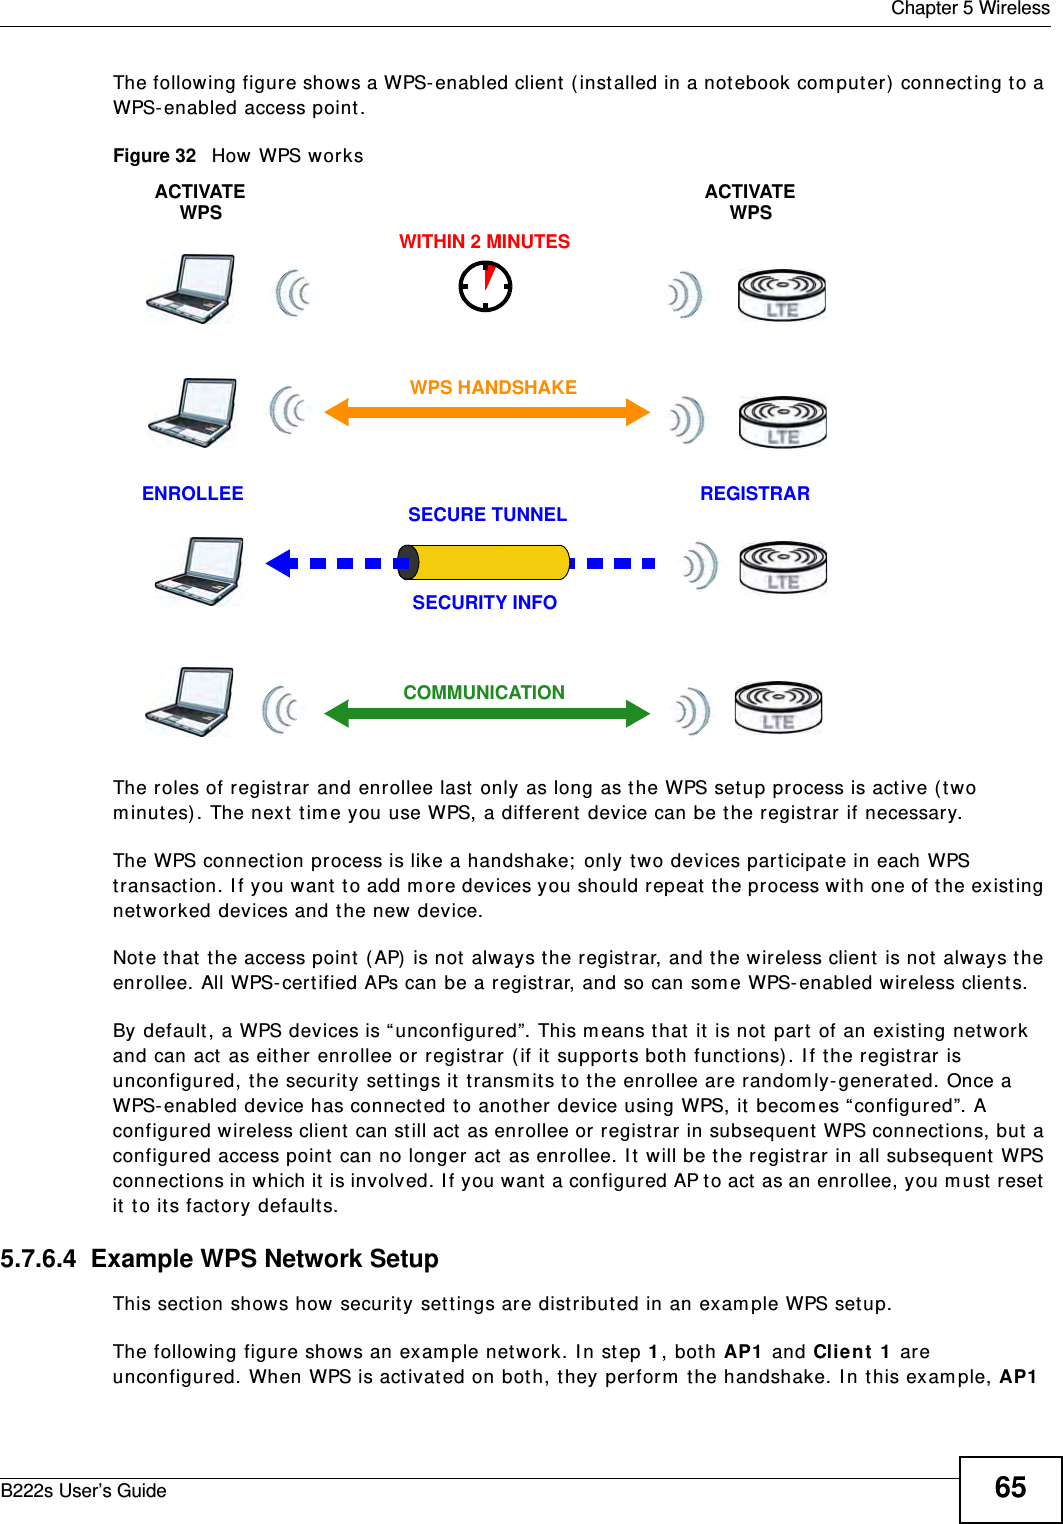  Chapter 5 WirelessB222s User’s Guide 65The following figure shows a WPS- enabled client  ( inst alled in a notebook com put er)  connect ing t o a WPS- enabled access point .Figure 32   How WPS w orksThe roles of registrar and enrollee last only as long as the WPS set up process is active ( t wo m inut es) . The next  t im e you use WPS, a differ ent  device can be t he regist rar if necessary.The WPS connect ion process is like a handshake;  only two devices part icipat e in each WPS transact ion. I f you want  t o add m ore devices you should repeat  t he process wit h one of t he exist ing networked devices and the new device.Note that  t he access point  ( AP)  is not always t he registrar, and t he wireless client  is not  always the enrollee. All WPS- cert ified APs can be a registrar, and so can som e WPS- enabled wireless client s.By default , a WPS devices is “ unconfigured”. This m eans t hat  it is not par t  of an existing net w ork and can act  as eit her enrollee or  registrar ( if it  support s bot h funct ions) . I f the registrar is unconfigured, the securit y sett ings it t ransm its t o the enrollee are random ly- generat ed. Once a WPS- enabled device has connect ed t o another device using WPS, it  becom es “ configured”. A configured w ireless client  can still act  as enrollee or regist rar  in subsequent  WPS connections, but a configured access point can no longer act as enrollee. I t will be t he registrar in all subsequent  WPS connect ions in which it is involved. I f you want a configured AP t o act  as an enrollee, you m ust  reset  it  t o its factory defaults.5.7.6.4  Example WPS Network SetupThis sect ion shows how securit y set t ings are dist ributed in an exam ple WPS setup.The following figure shows an exam ple net work. I n st ep 1, both AP1  and Client  1  are unconfigured. When WPS is activat ed on bot h, t hey perform  t he handshake. I n t his exam ple, AP1  SECURE TUNNELSECURITY INFOWITHIN 2 MINUTESCOMMUNICATIONACTIVATEWPSACTIVATEWPSWPS HANDSHAKEREGISTRARENROLLEE